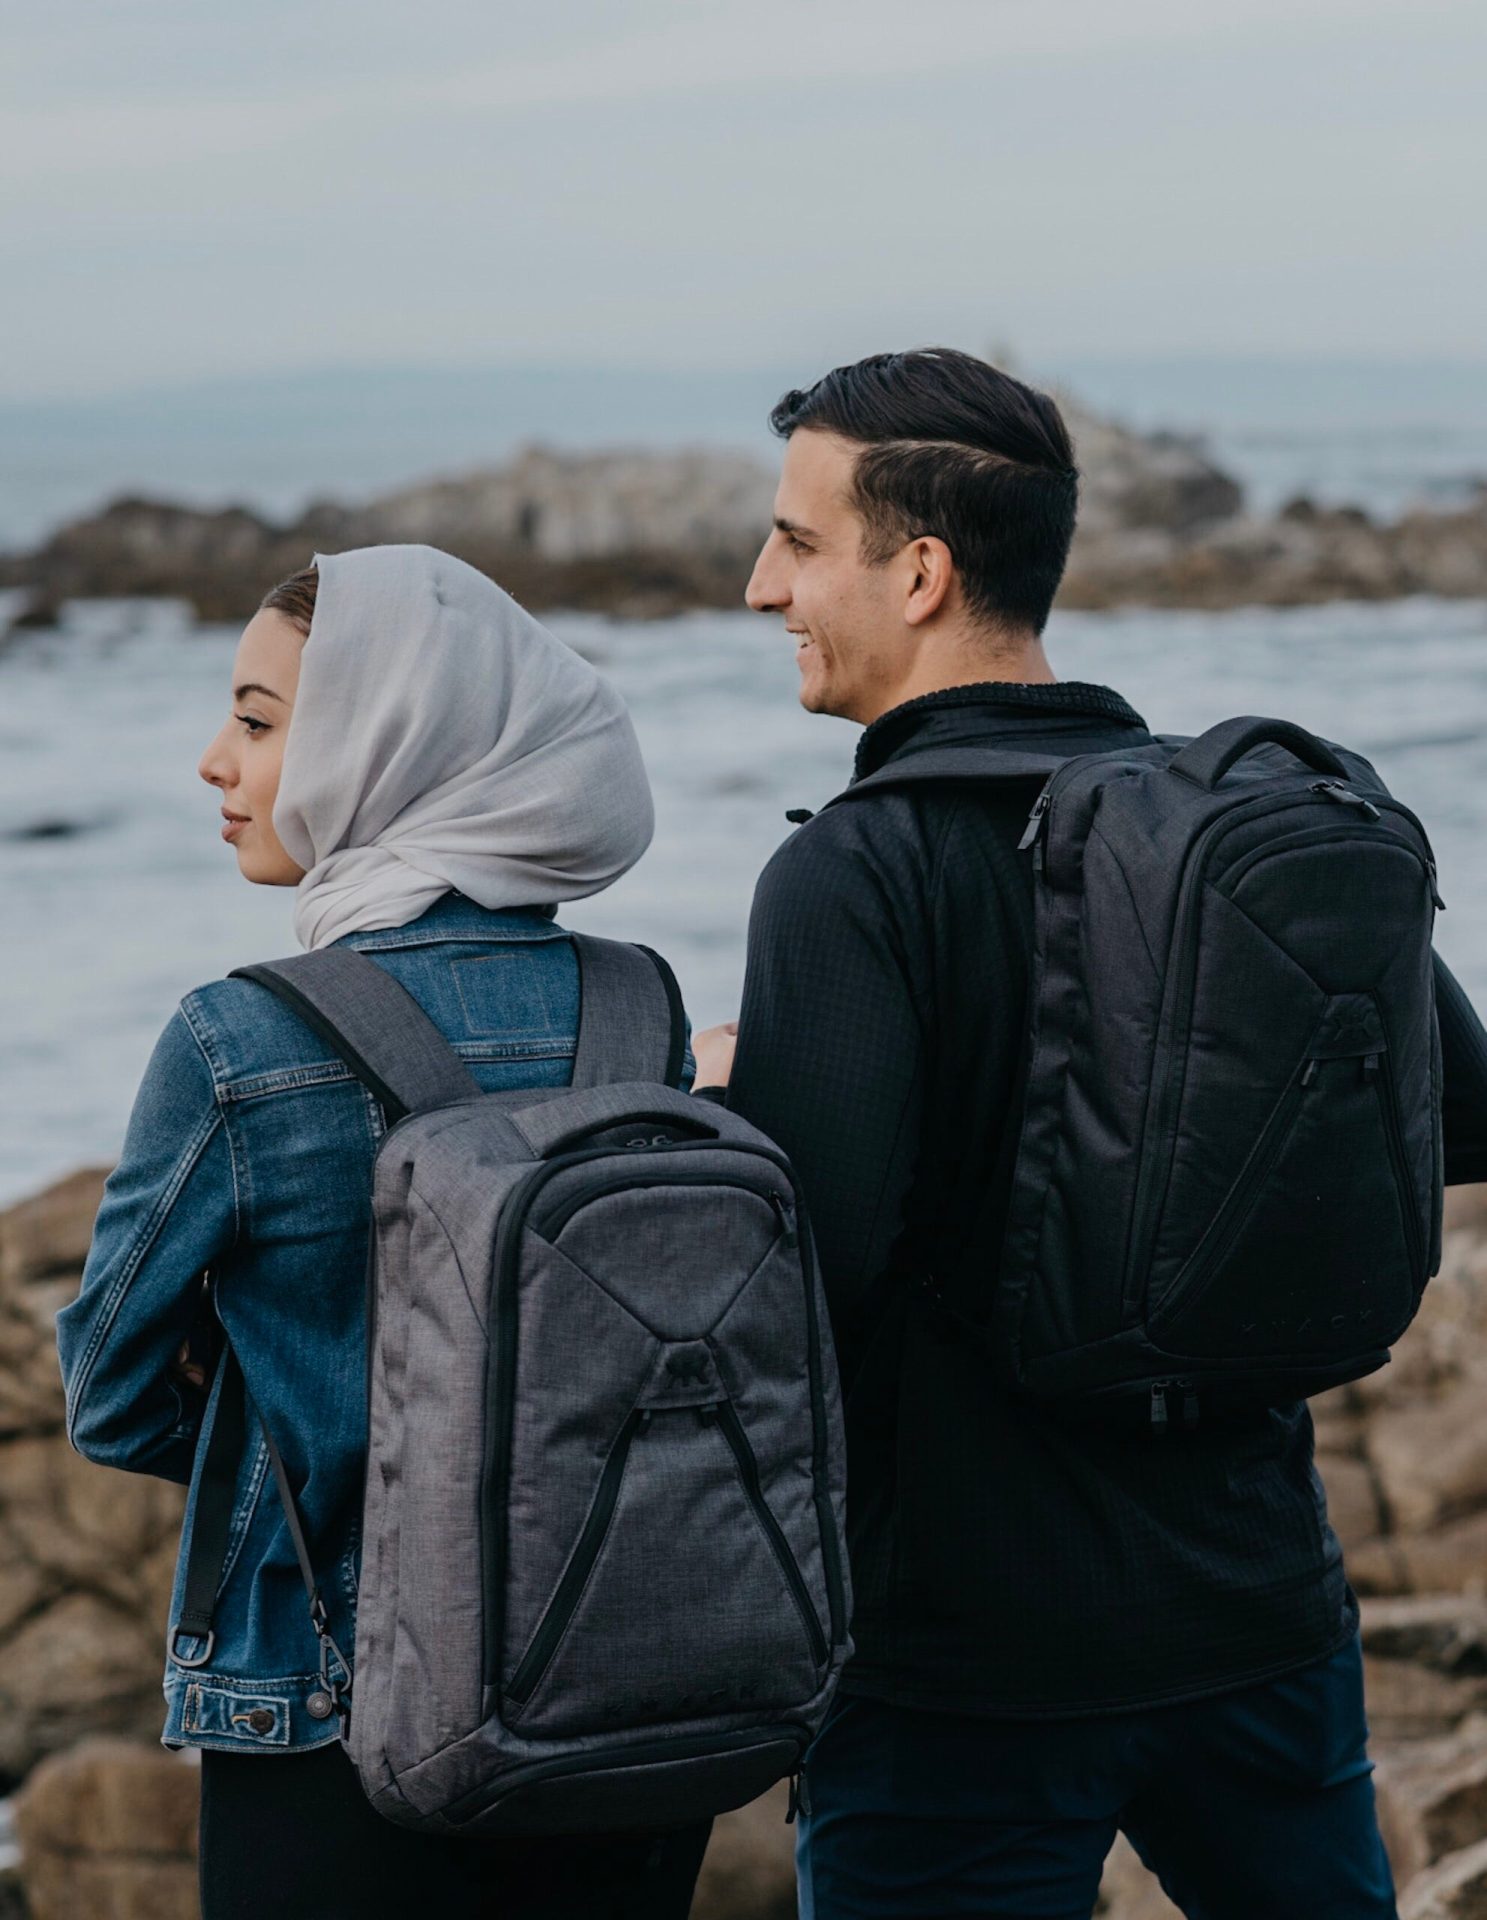 Noha Souhnoune and her husband wearing their Knack Packs while on their honeymoon